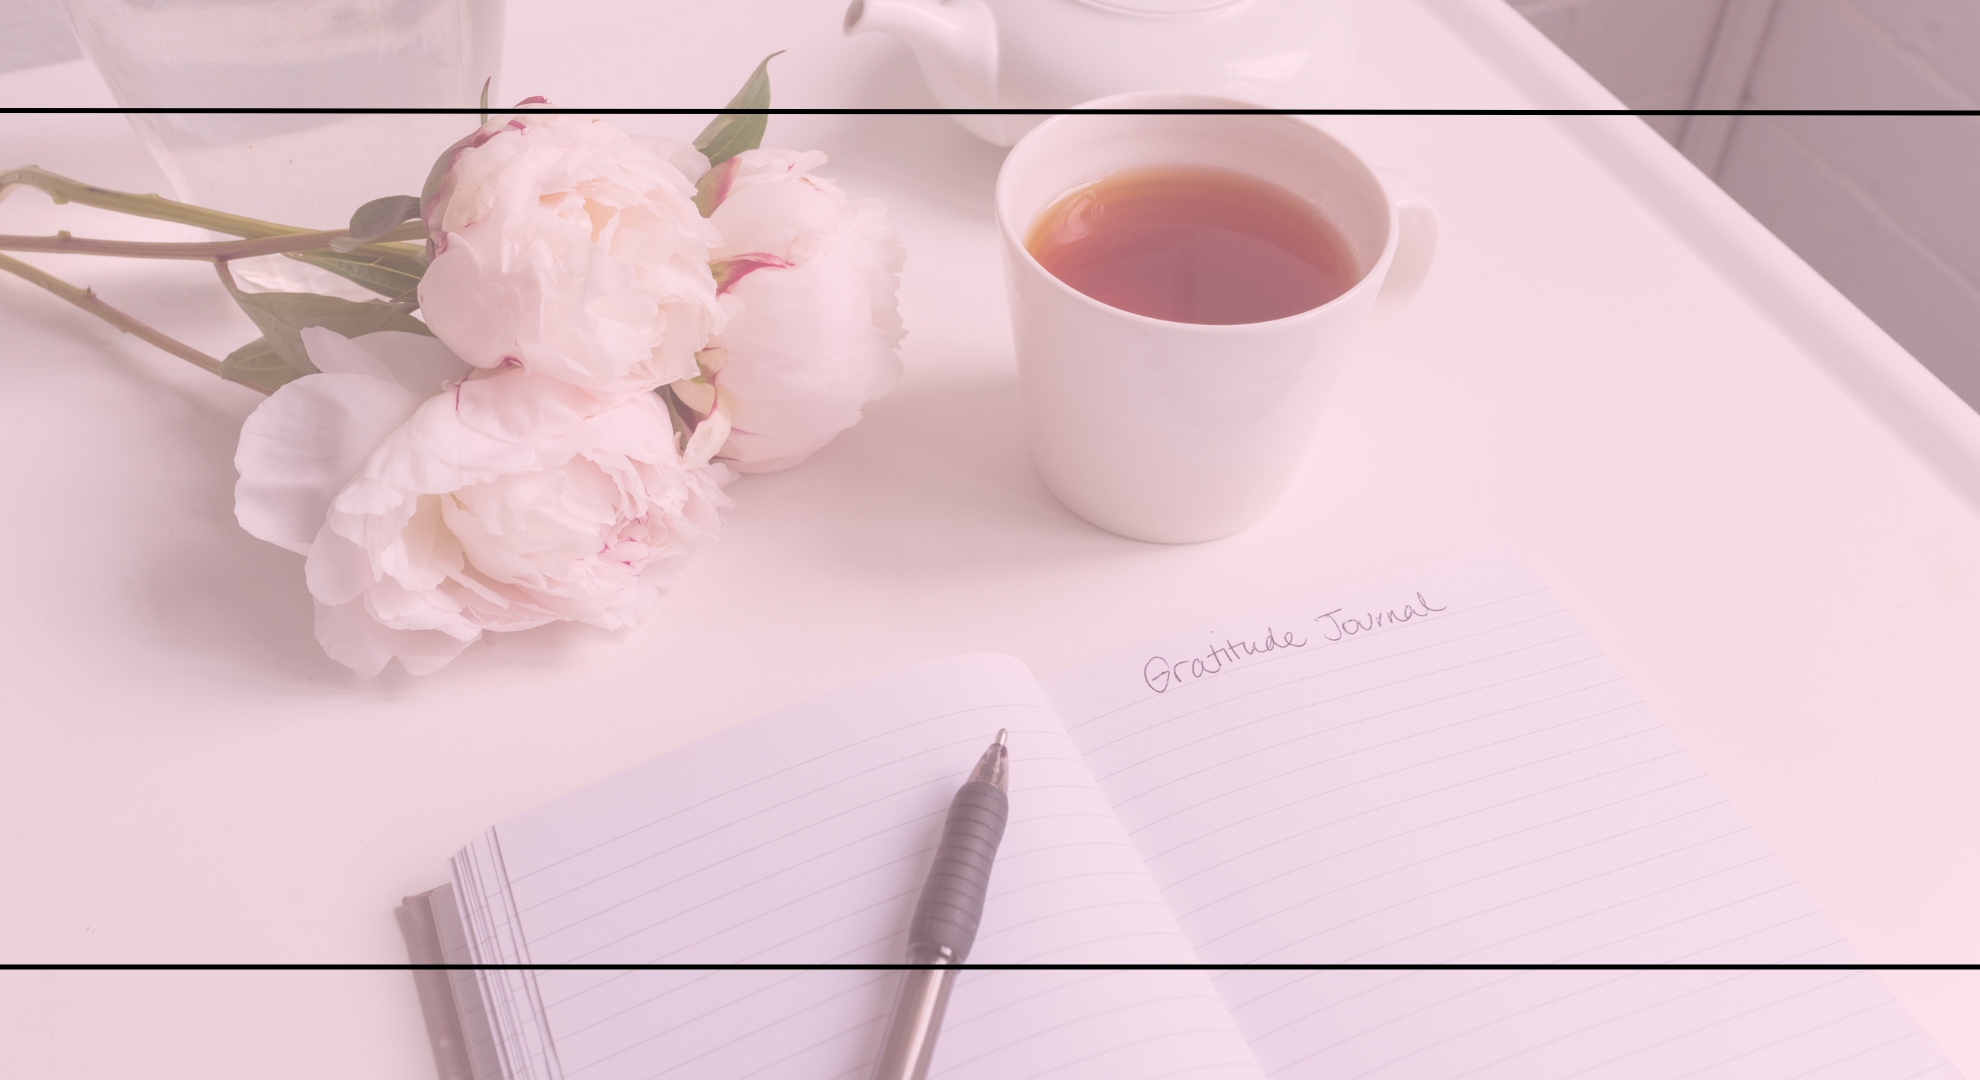 Flowers, tea, and an open journal on a table with a pink overlay